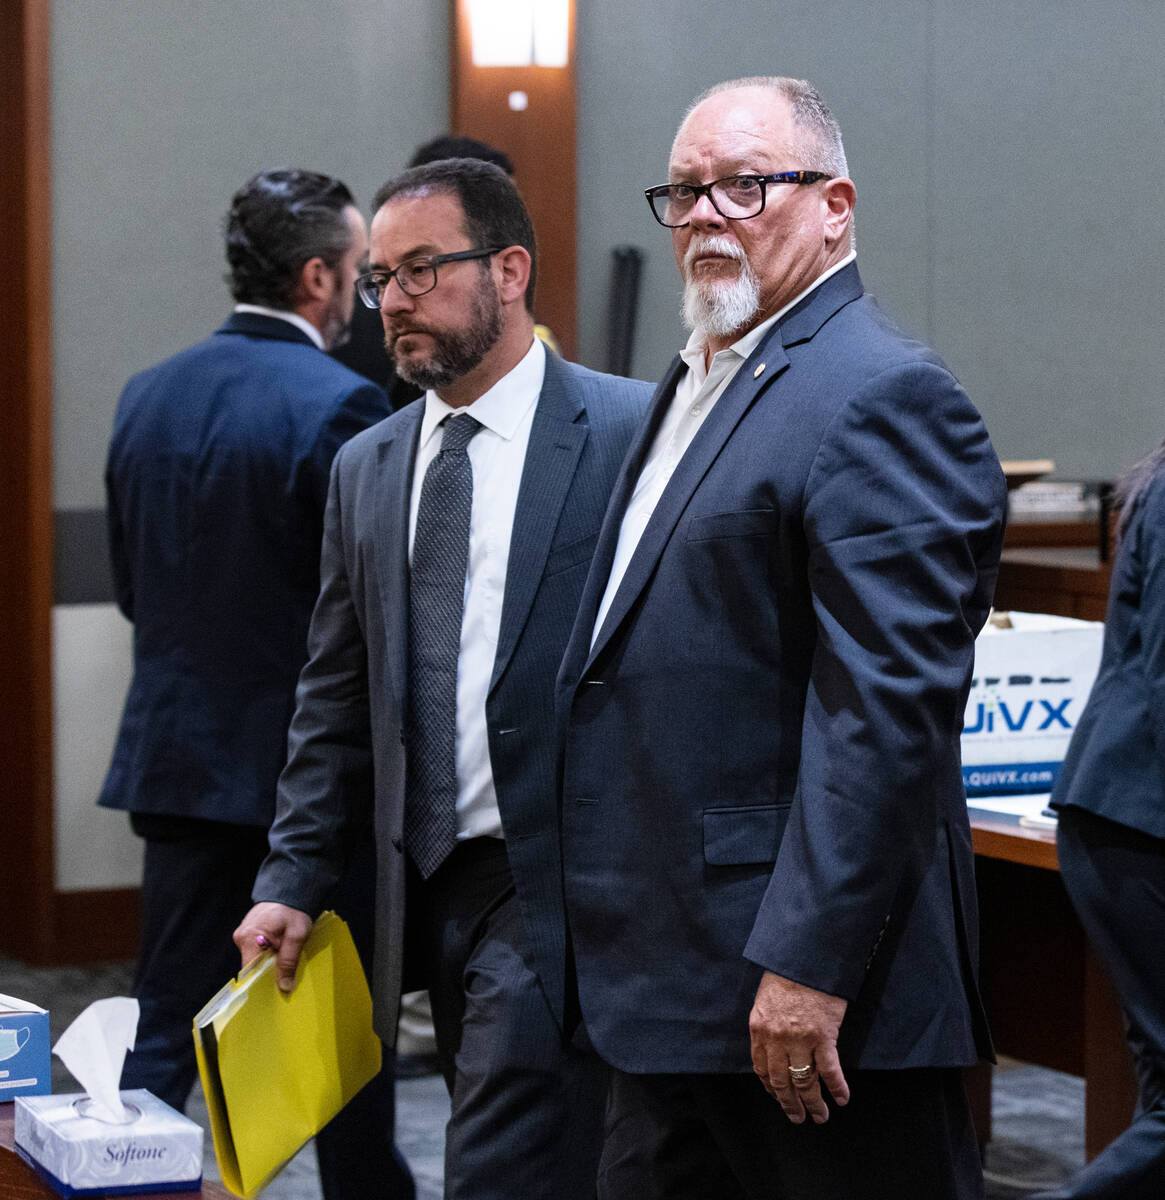 Richard Devries, 66, right, appears in court with his attorney, Richard Schonfeld, on Aug. 24, ...